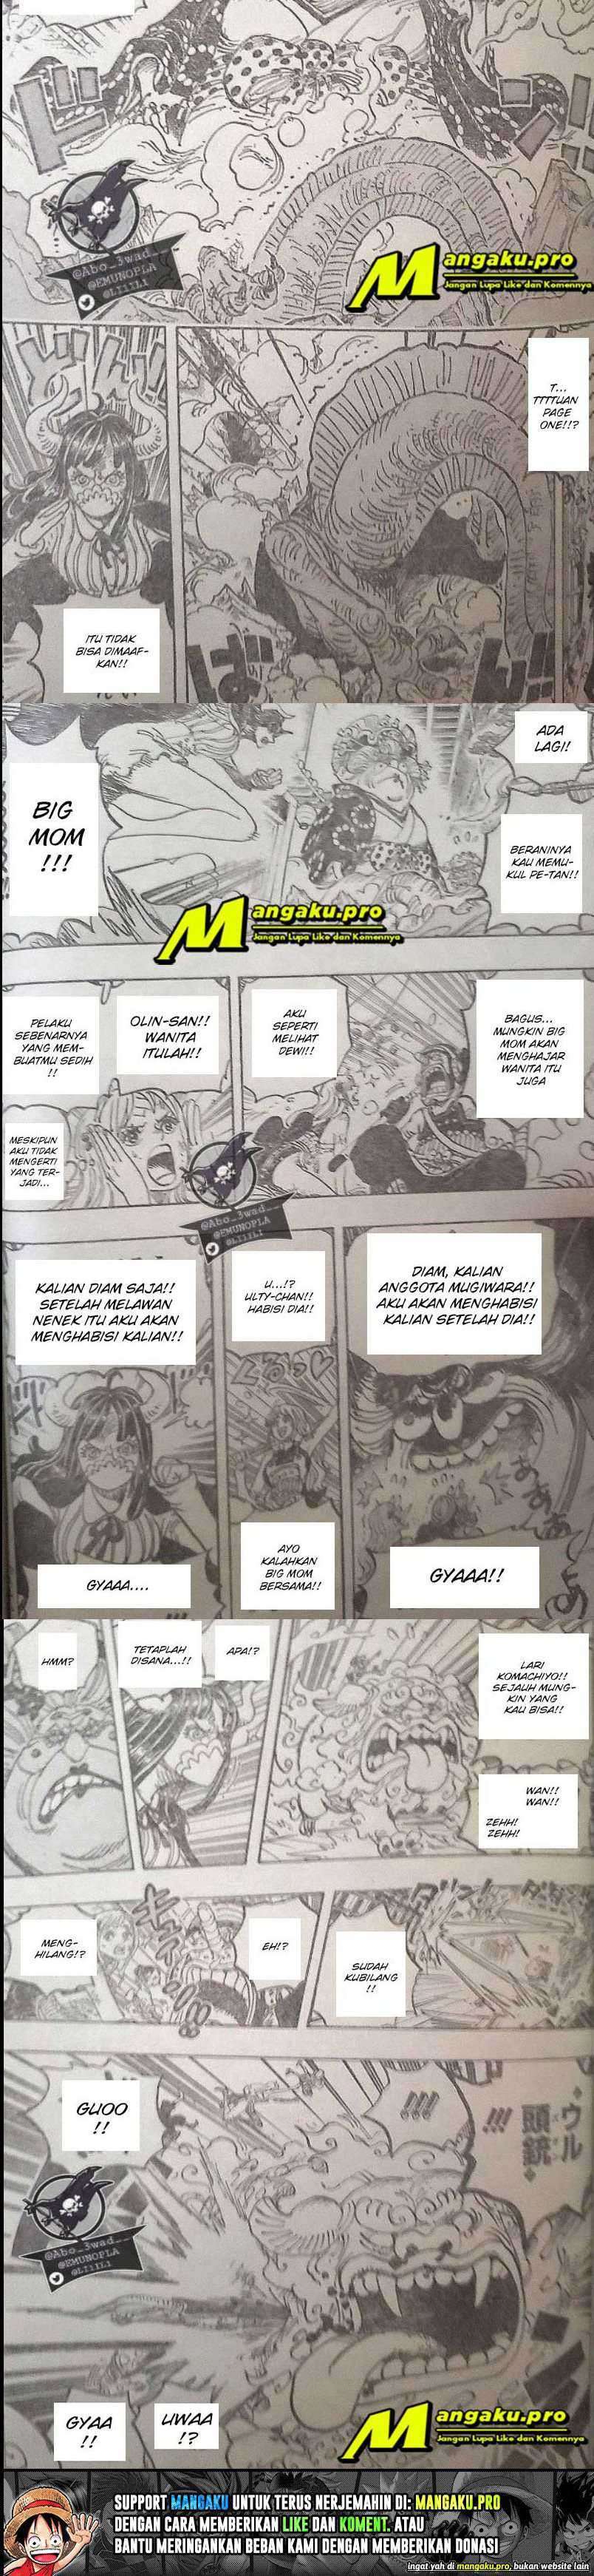 One Piece Chapter 1012 Lq - 45